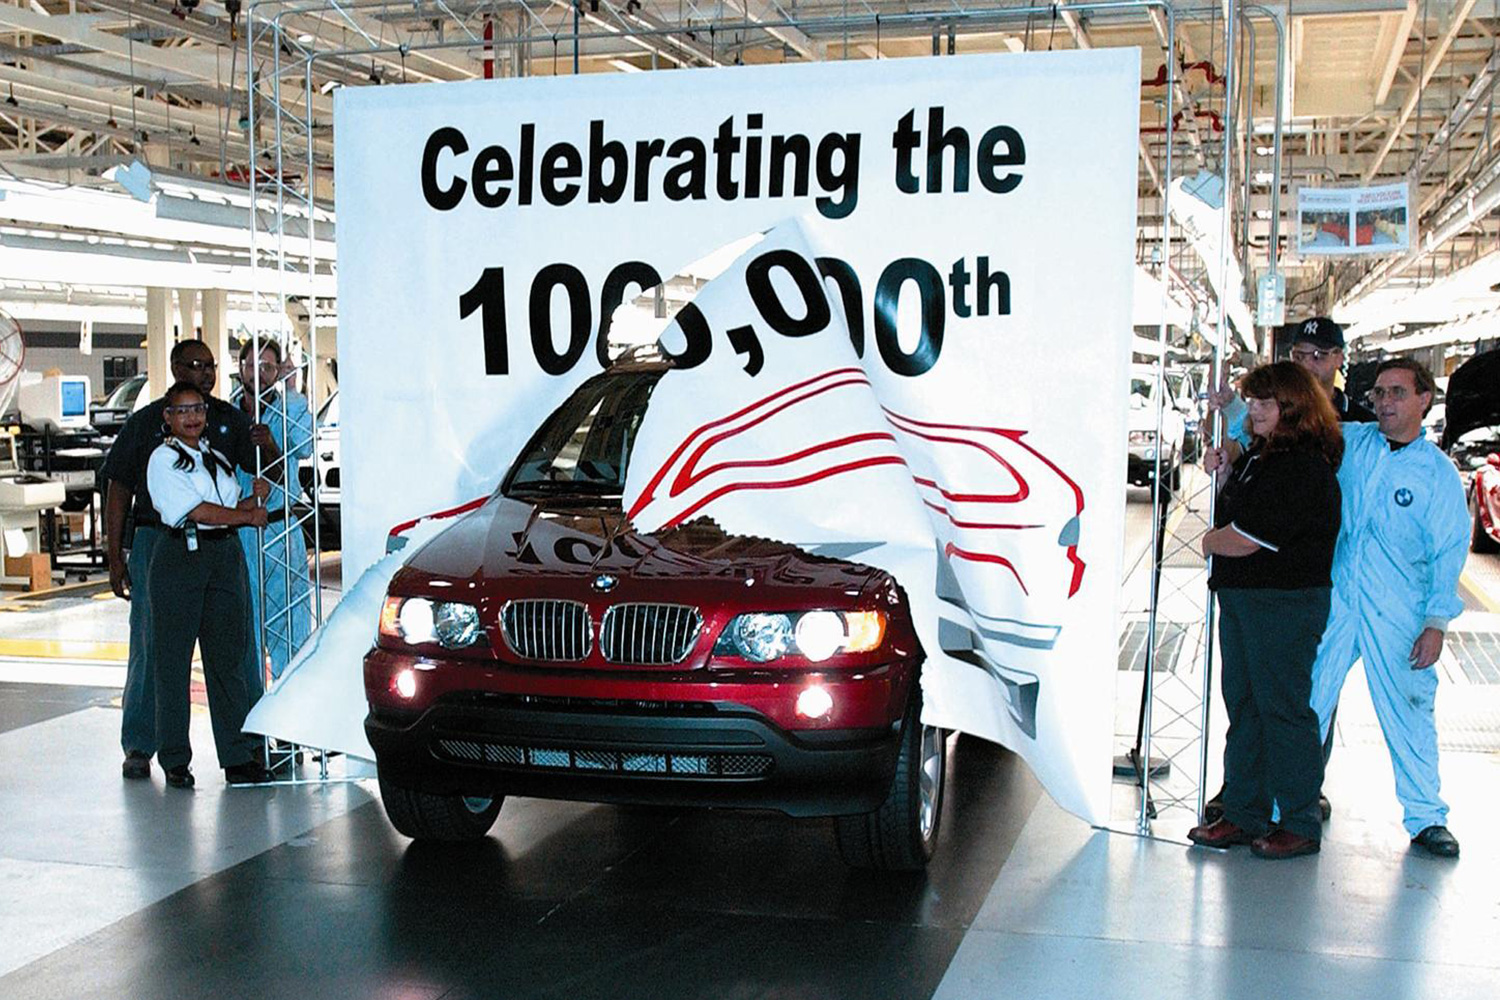 The 100,000th BMW X5 rolls off the line at the BMW Spartanburg factory in South Carolina on August 23, 2001